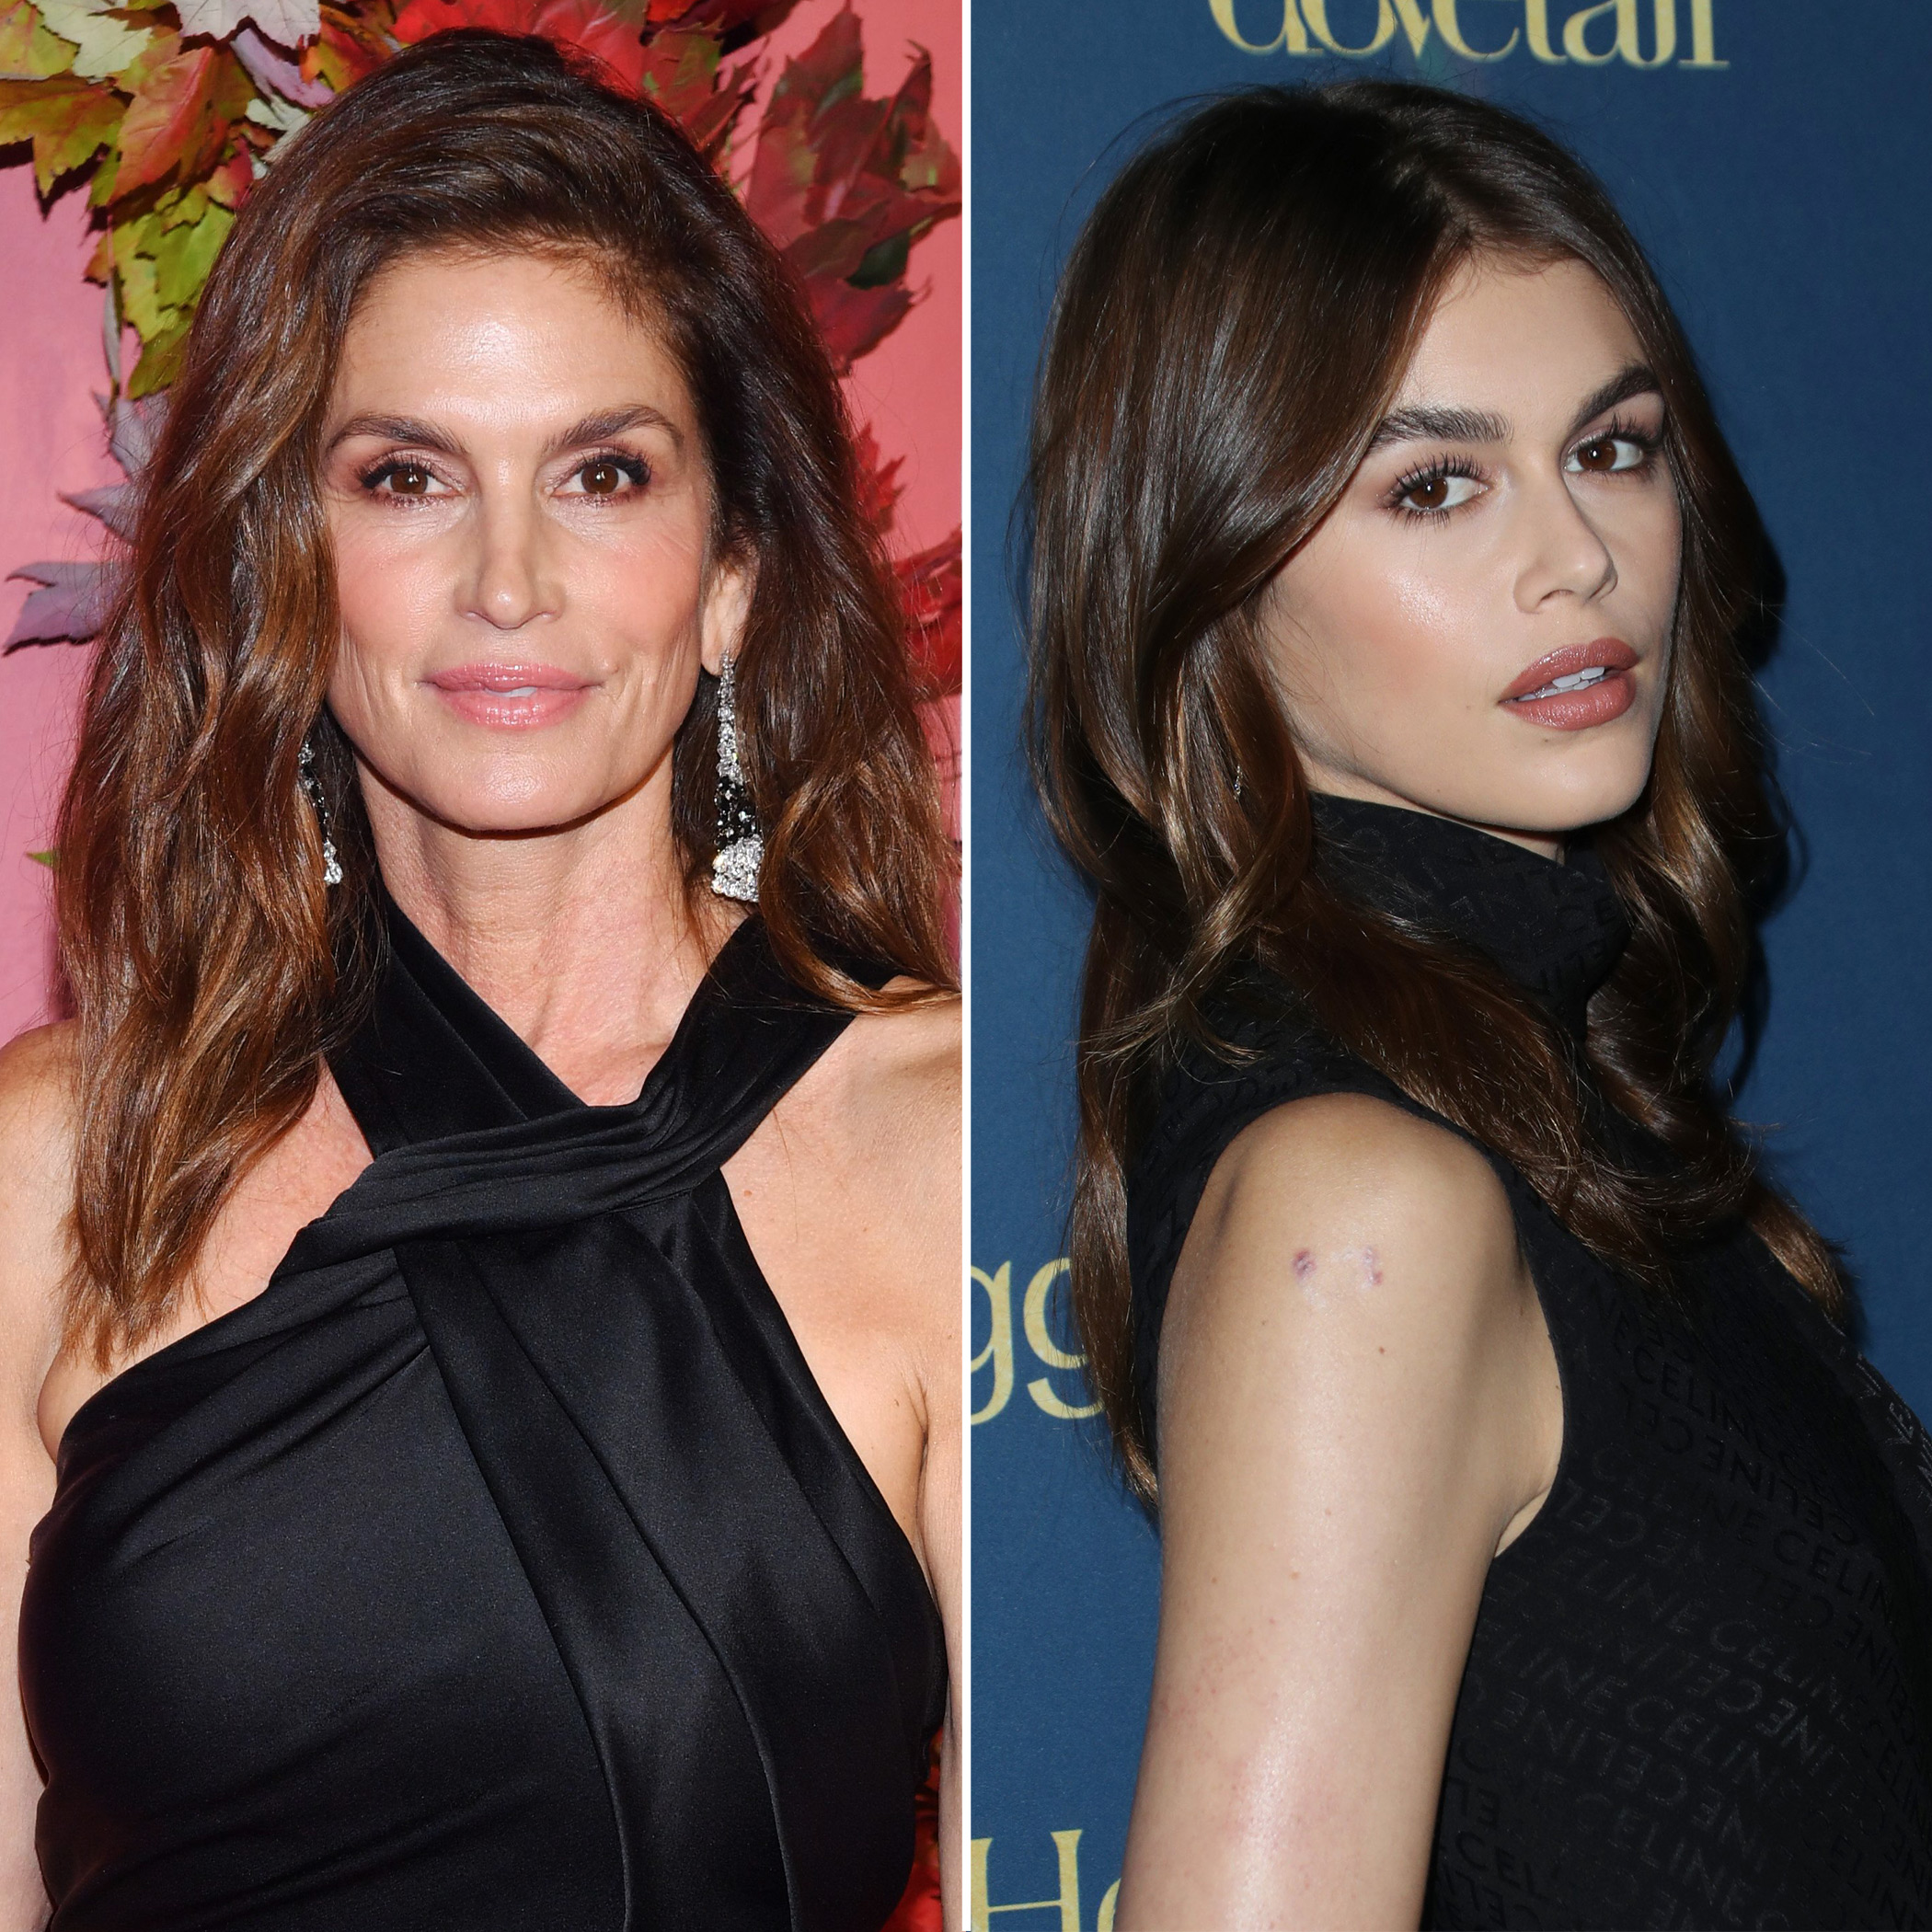 Cindy Crawford, 57, Struts Stuff in Little Black Dress in New Video - Parade